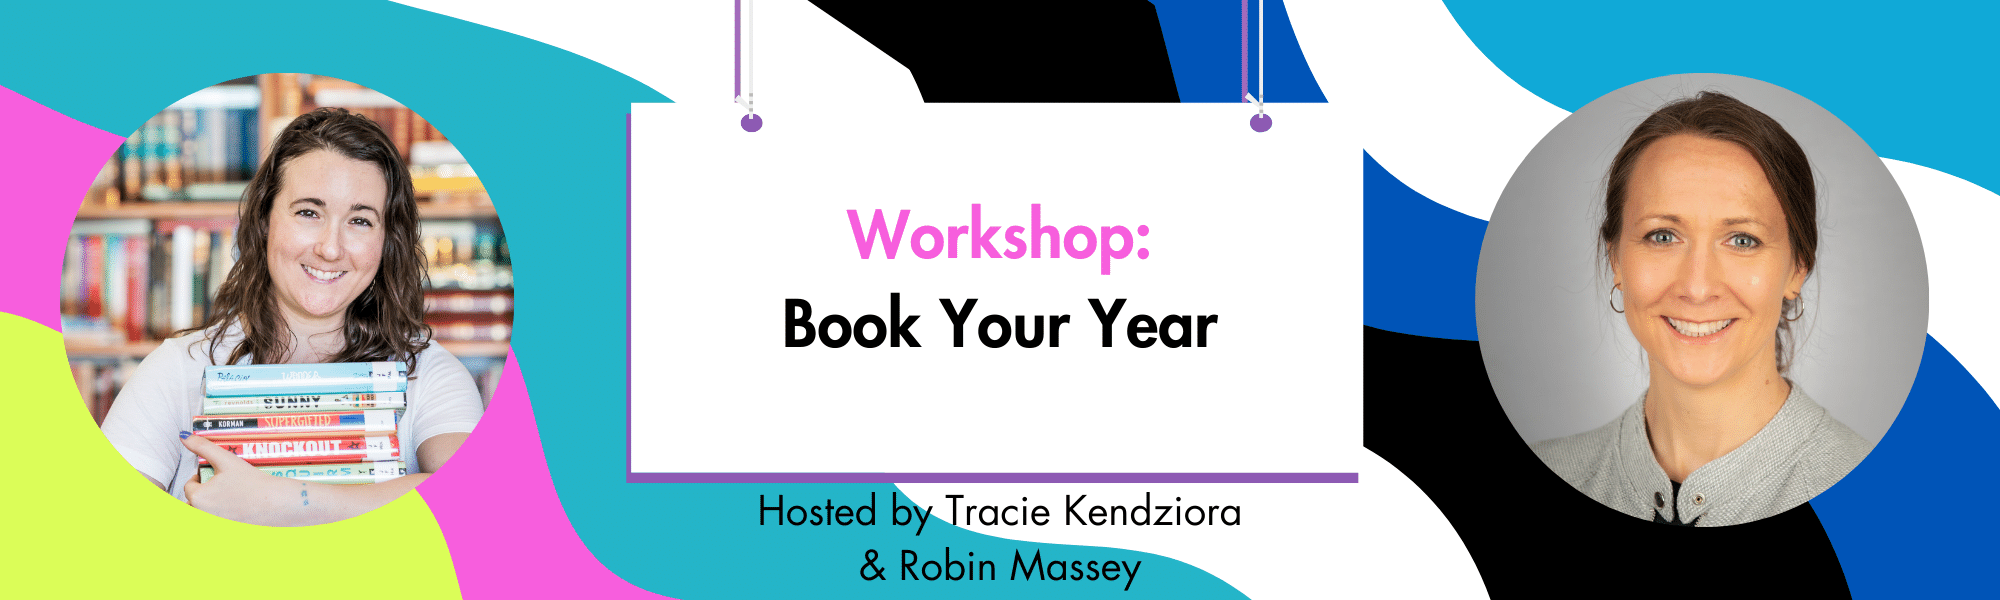 Book Your Year self-publishing workshop